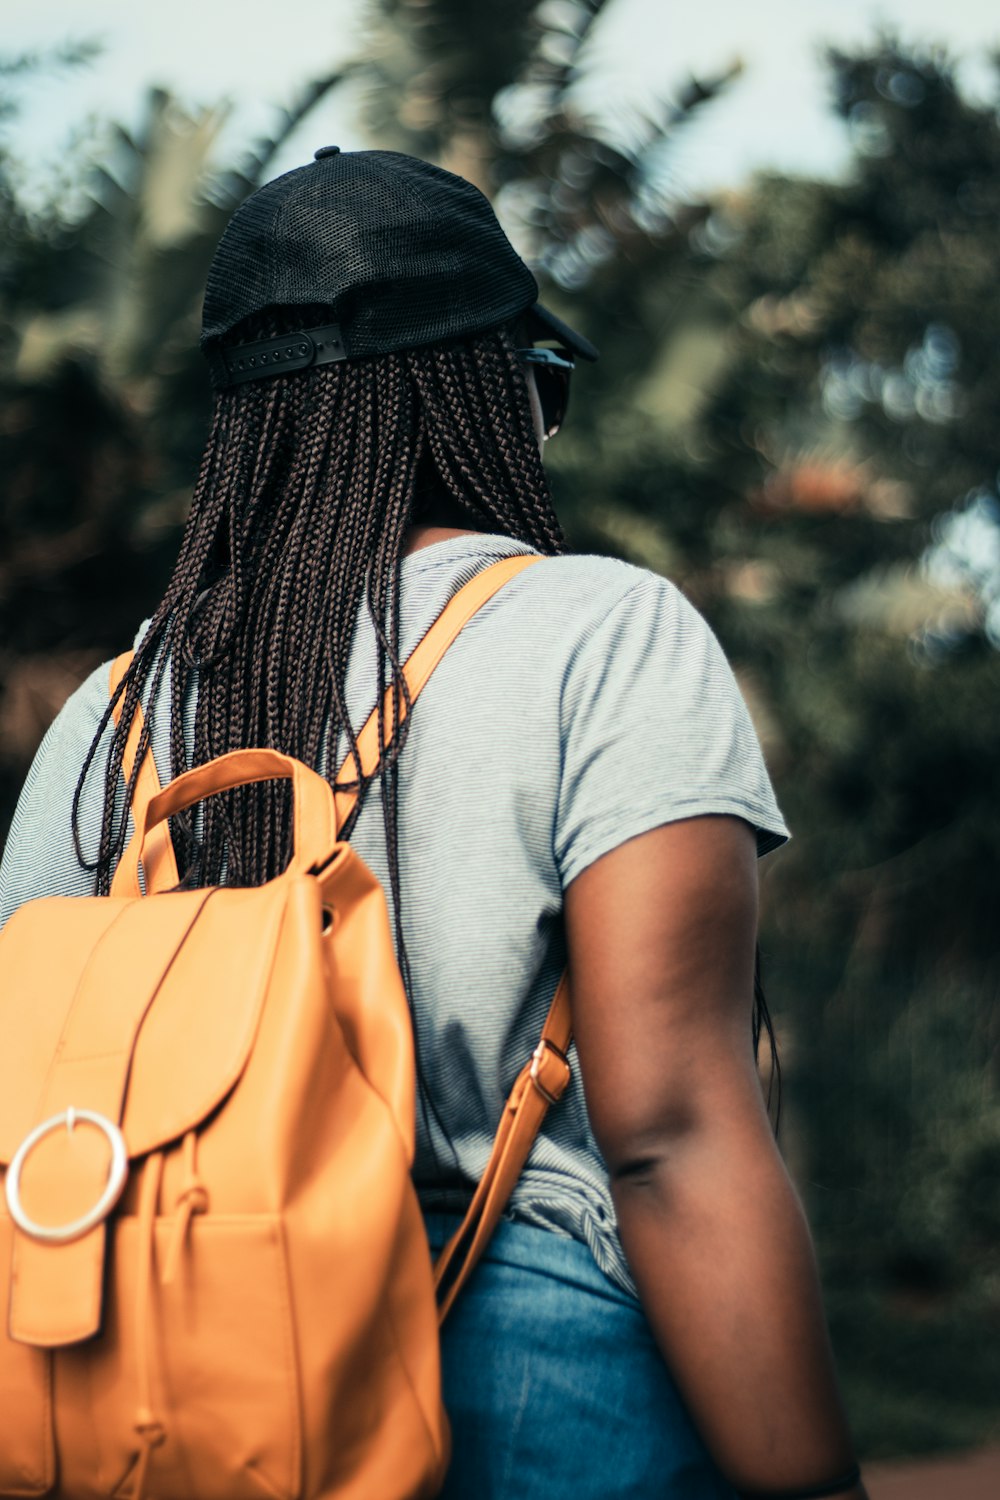 woman with braided hair wearing backpack